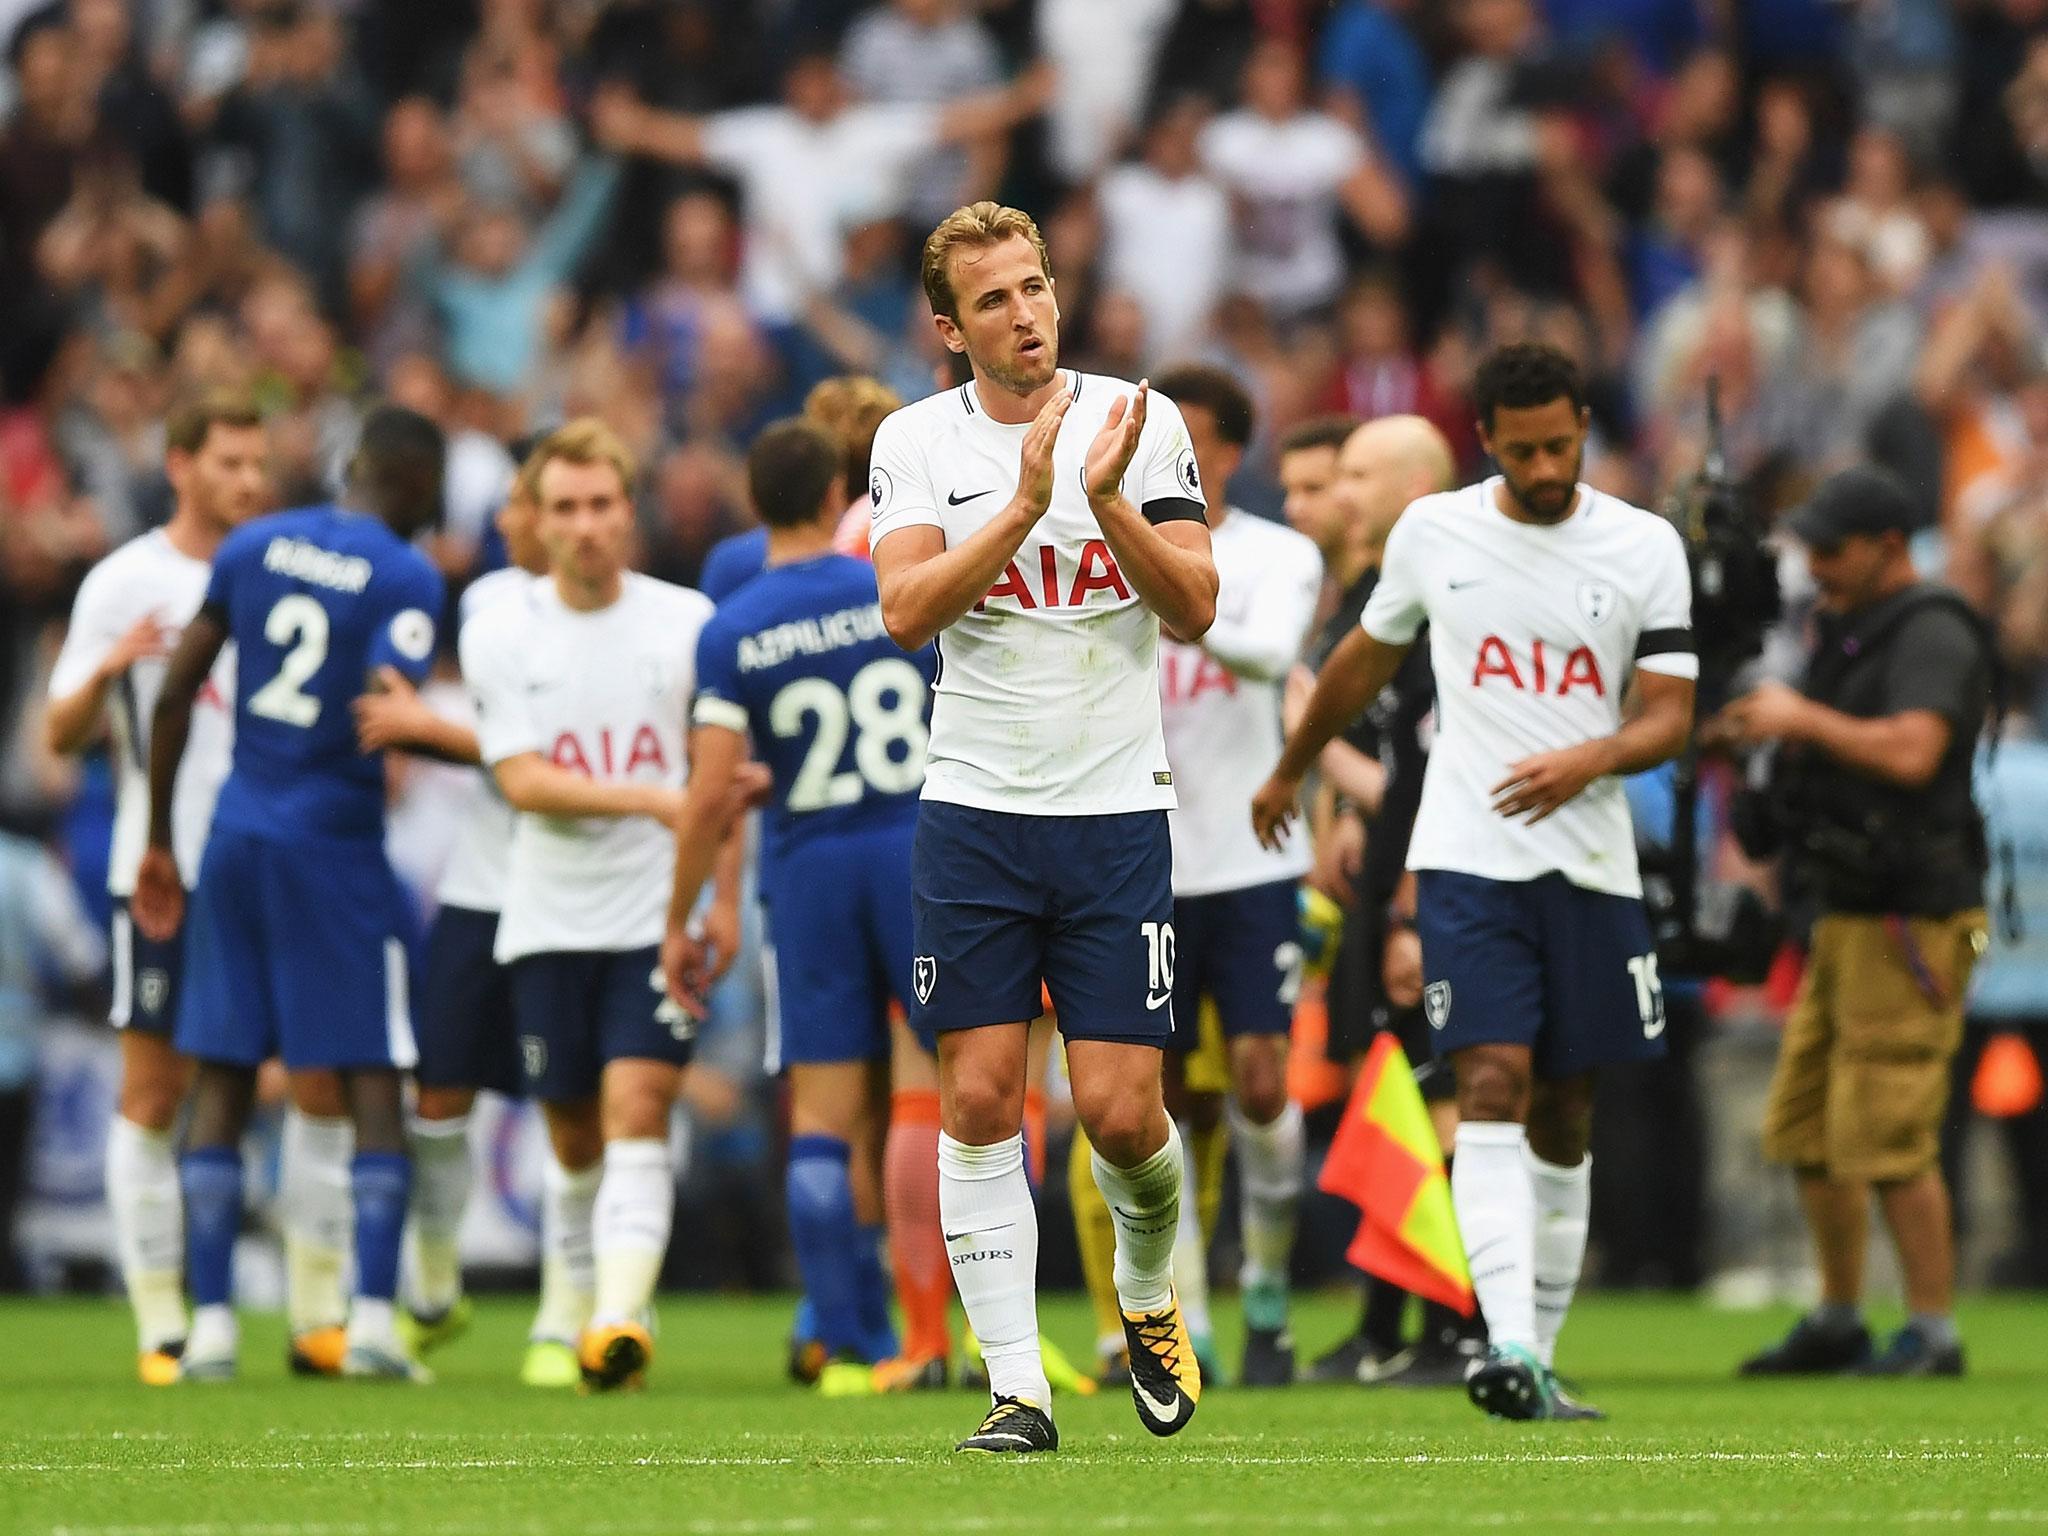 Tottenham succumbed to two Marcos Alonso goals to suffer yet more Wembley woe